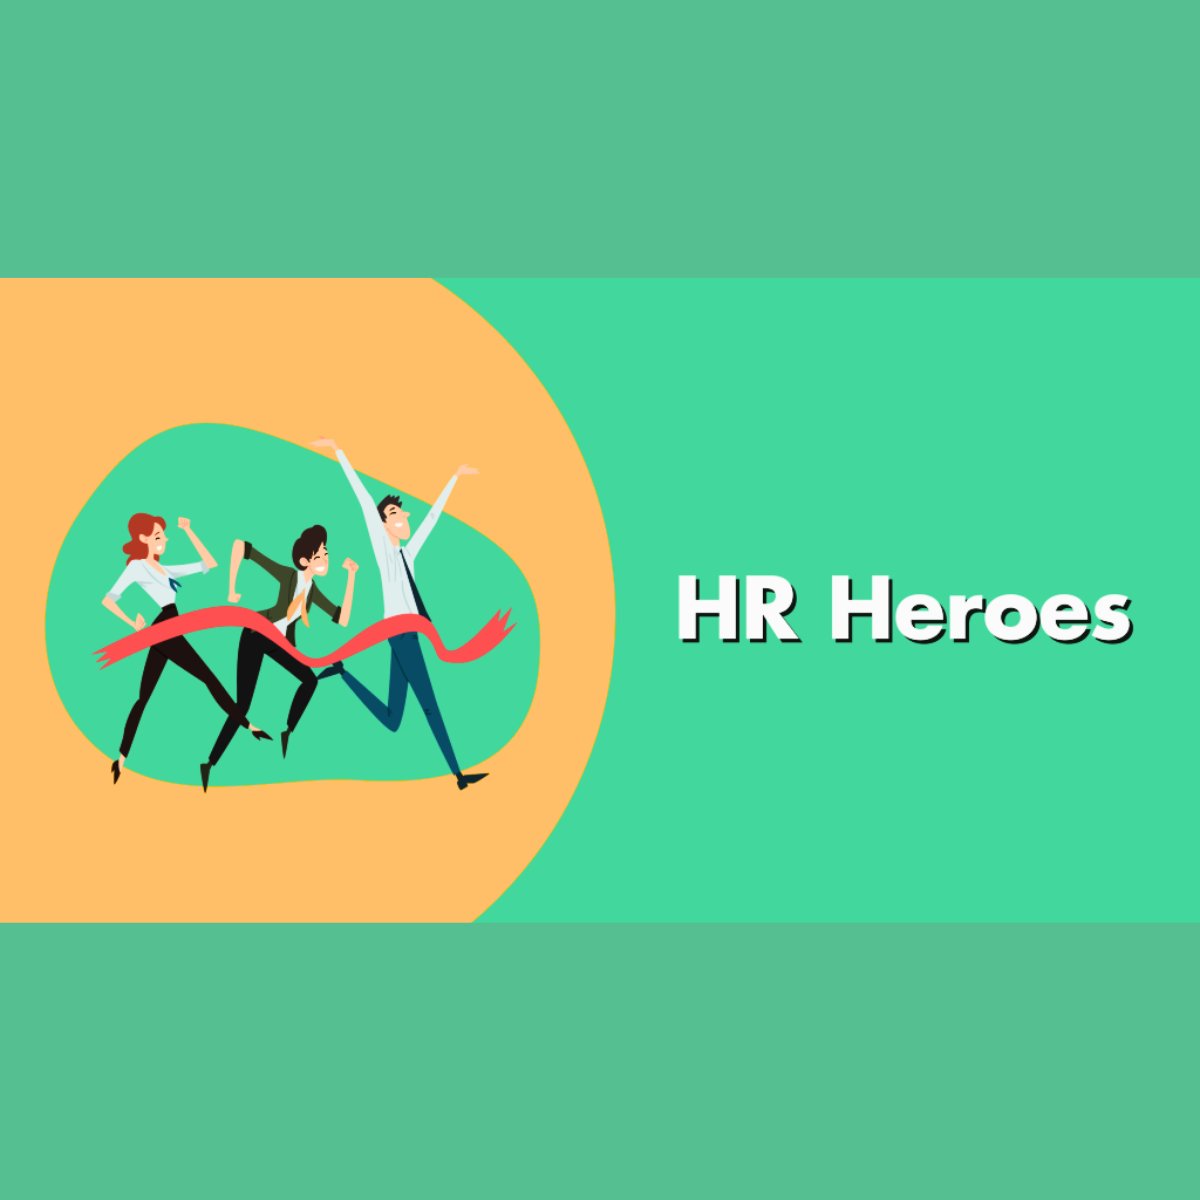 🌟 HR's Wage Wars: Balancing Act 2024 🌟

Wage disparities threaten productivity and morale. HR's solution: innovation. Addressing gaps with data, empathy, and creativity fosters a thriving culture. 💪 #HRHeroes #WageWisdom #EmployeeEngagement